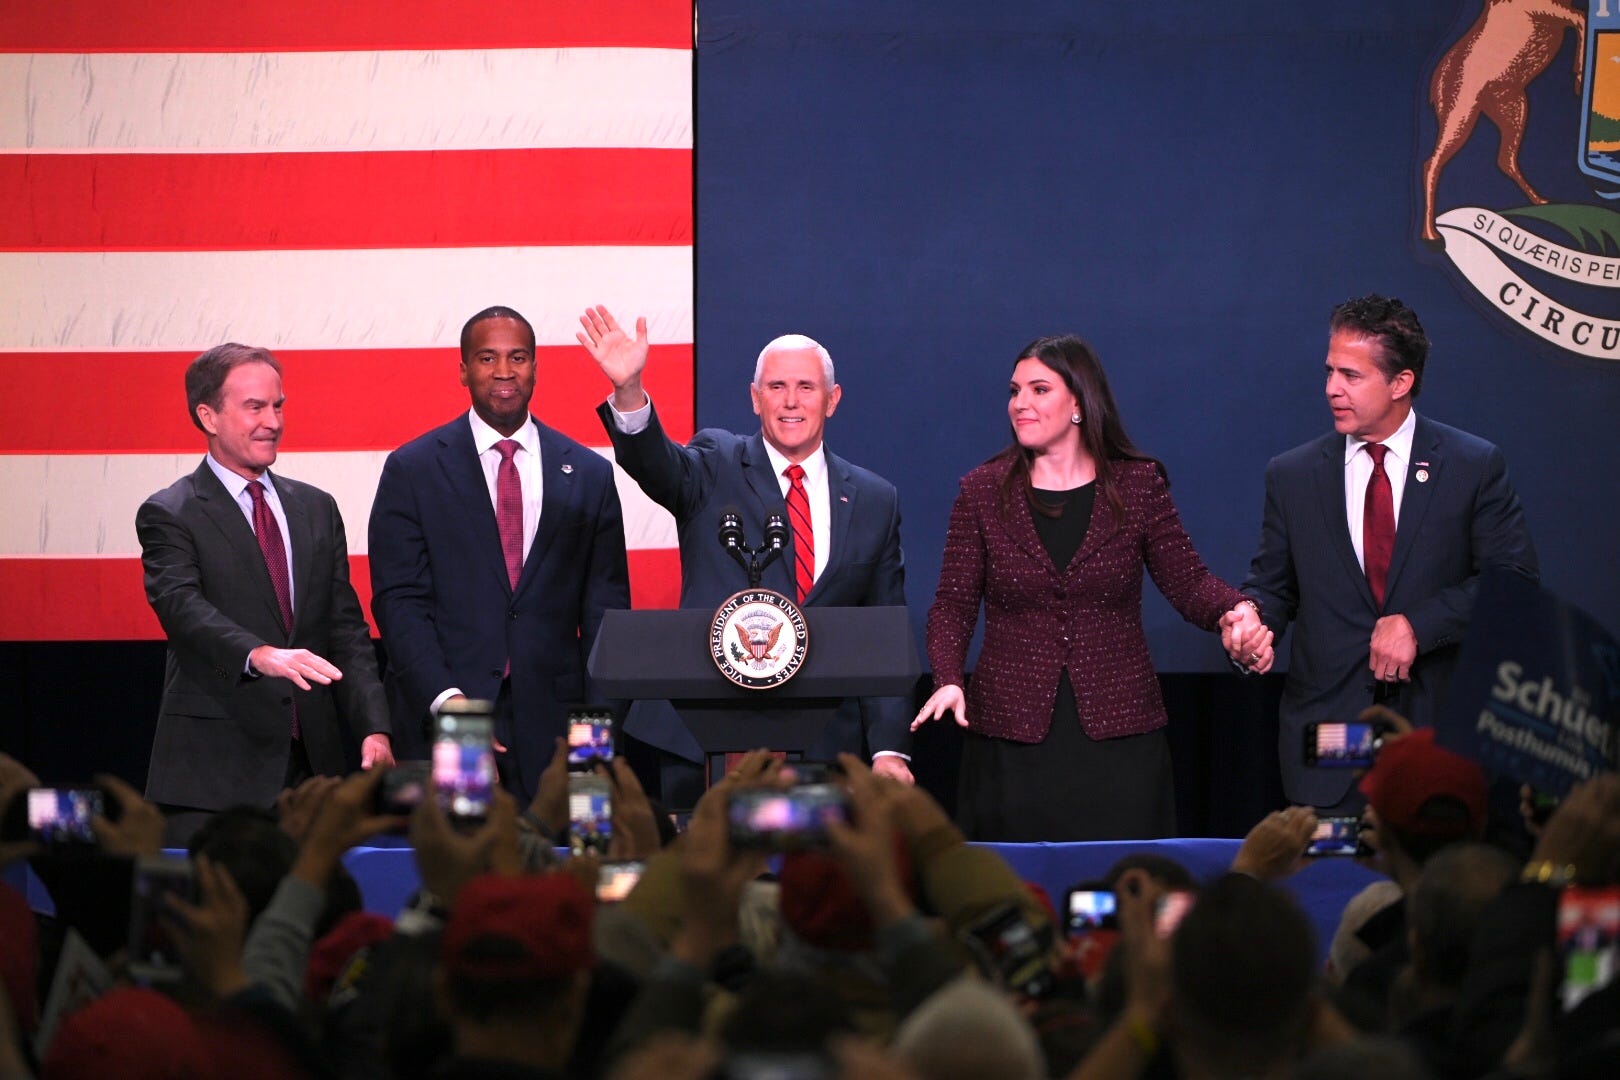 Michigan attorney general and Republican gubernatorial candidate Bill Schuette, from left, U.S. Senate candidate John James, Vice President Mike Pence, congressional candidate Lena Epstein and incumbent and candidate for re-election U.S. Rep. Mike Bishop, R-Rochester, stand together on stage during a campaign event at the Oakland County airport Monday in Waterford.